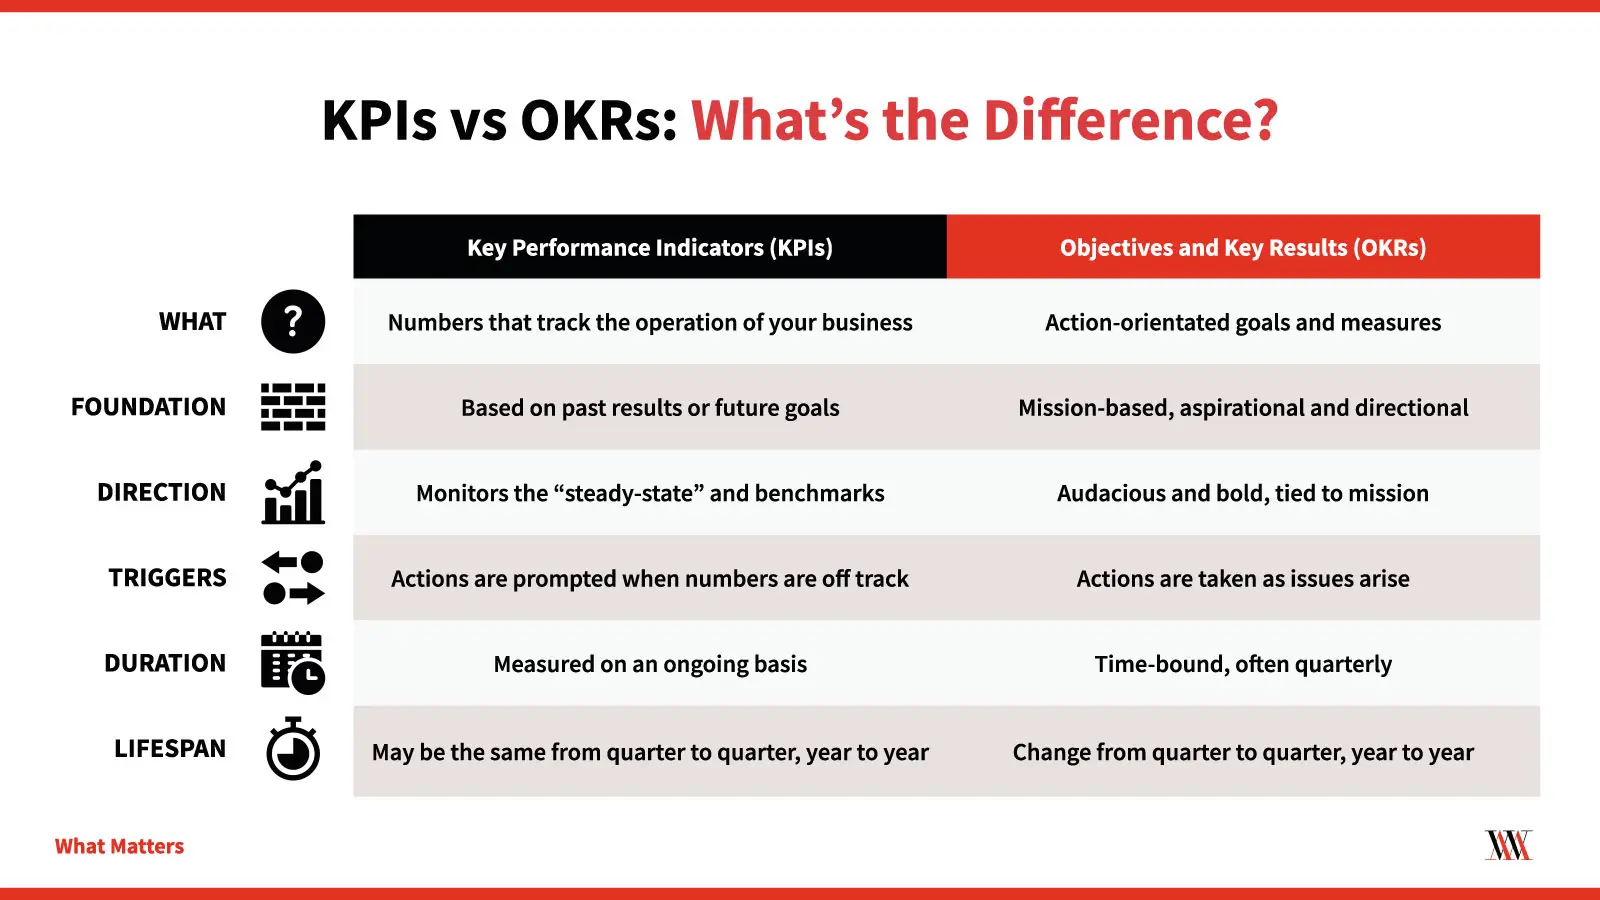 OKRs 101: What They Are and How They Help Your Business